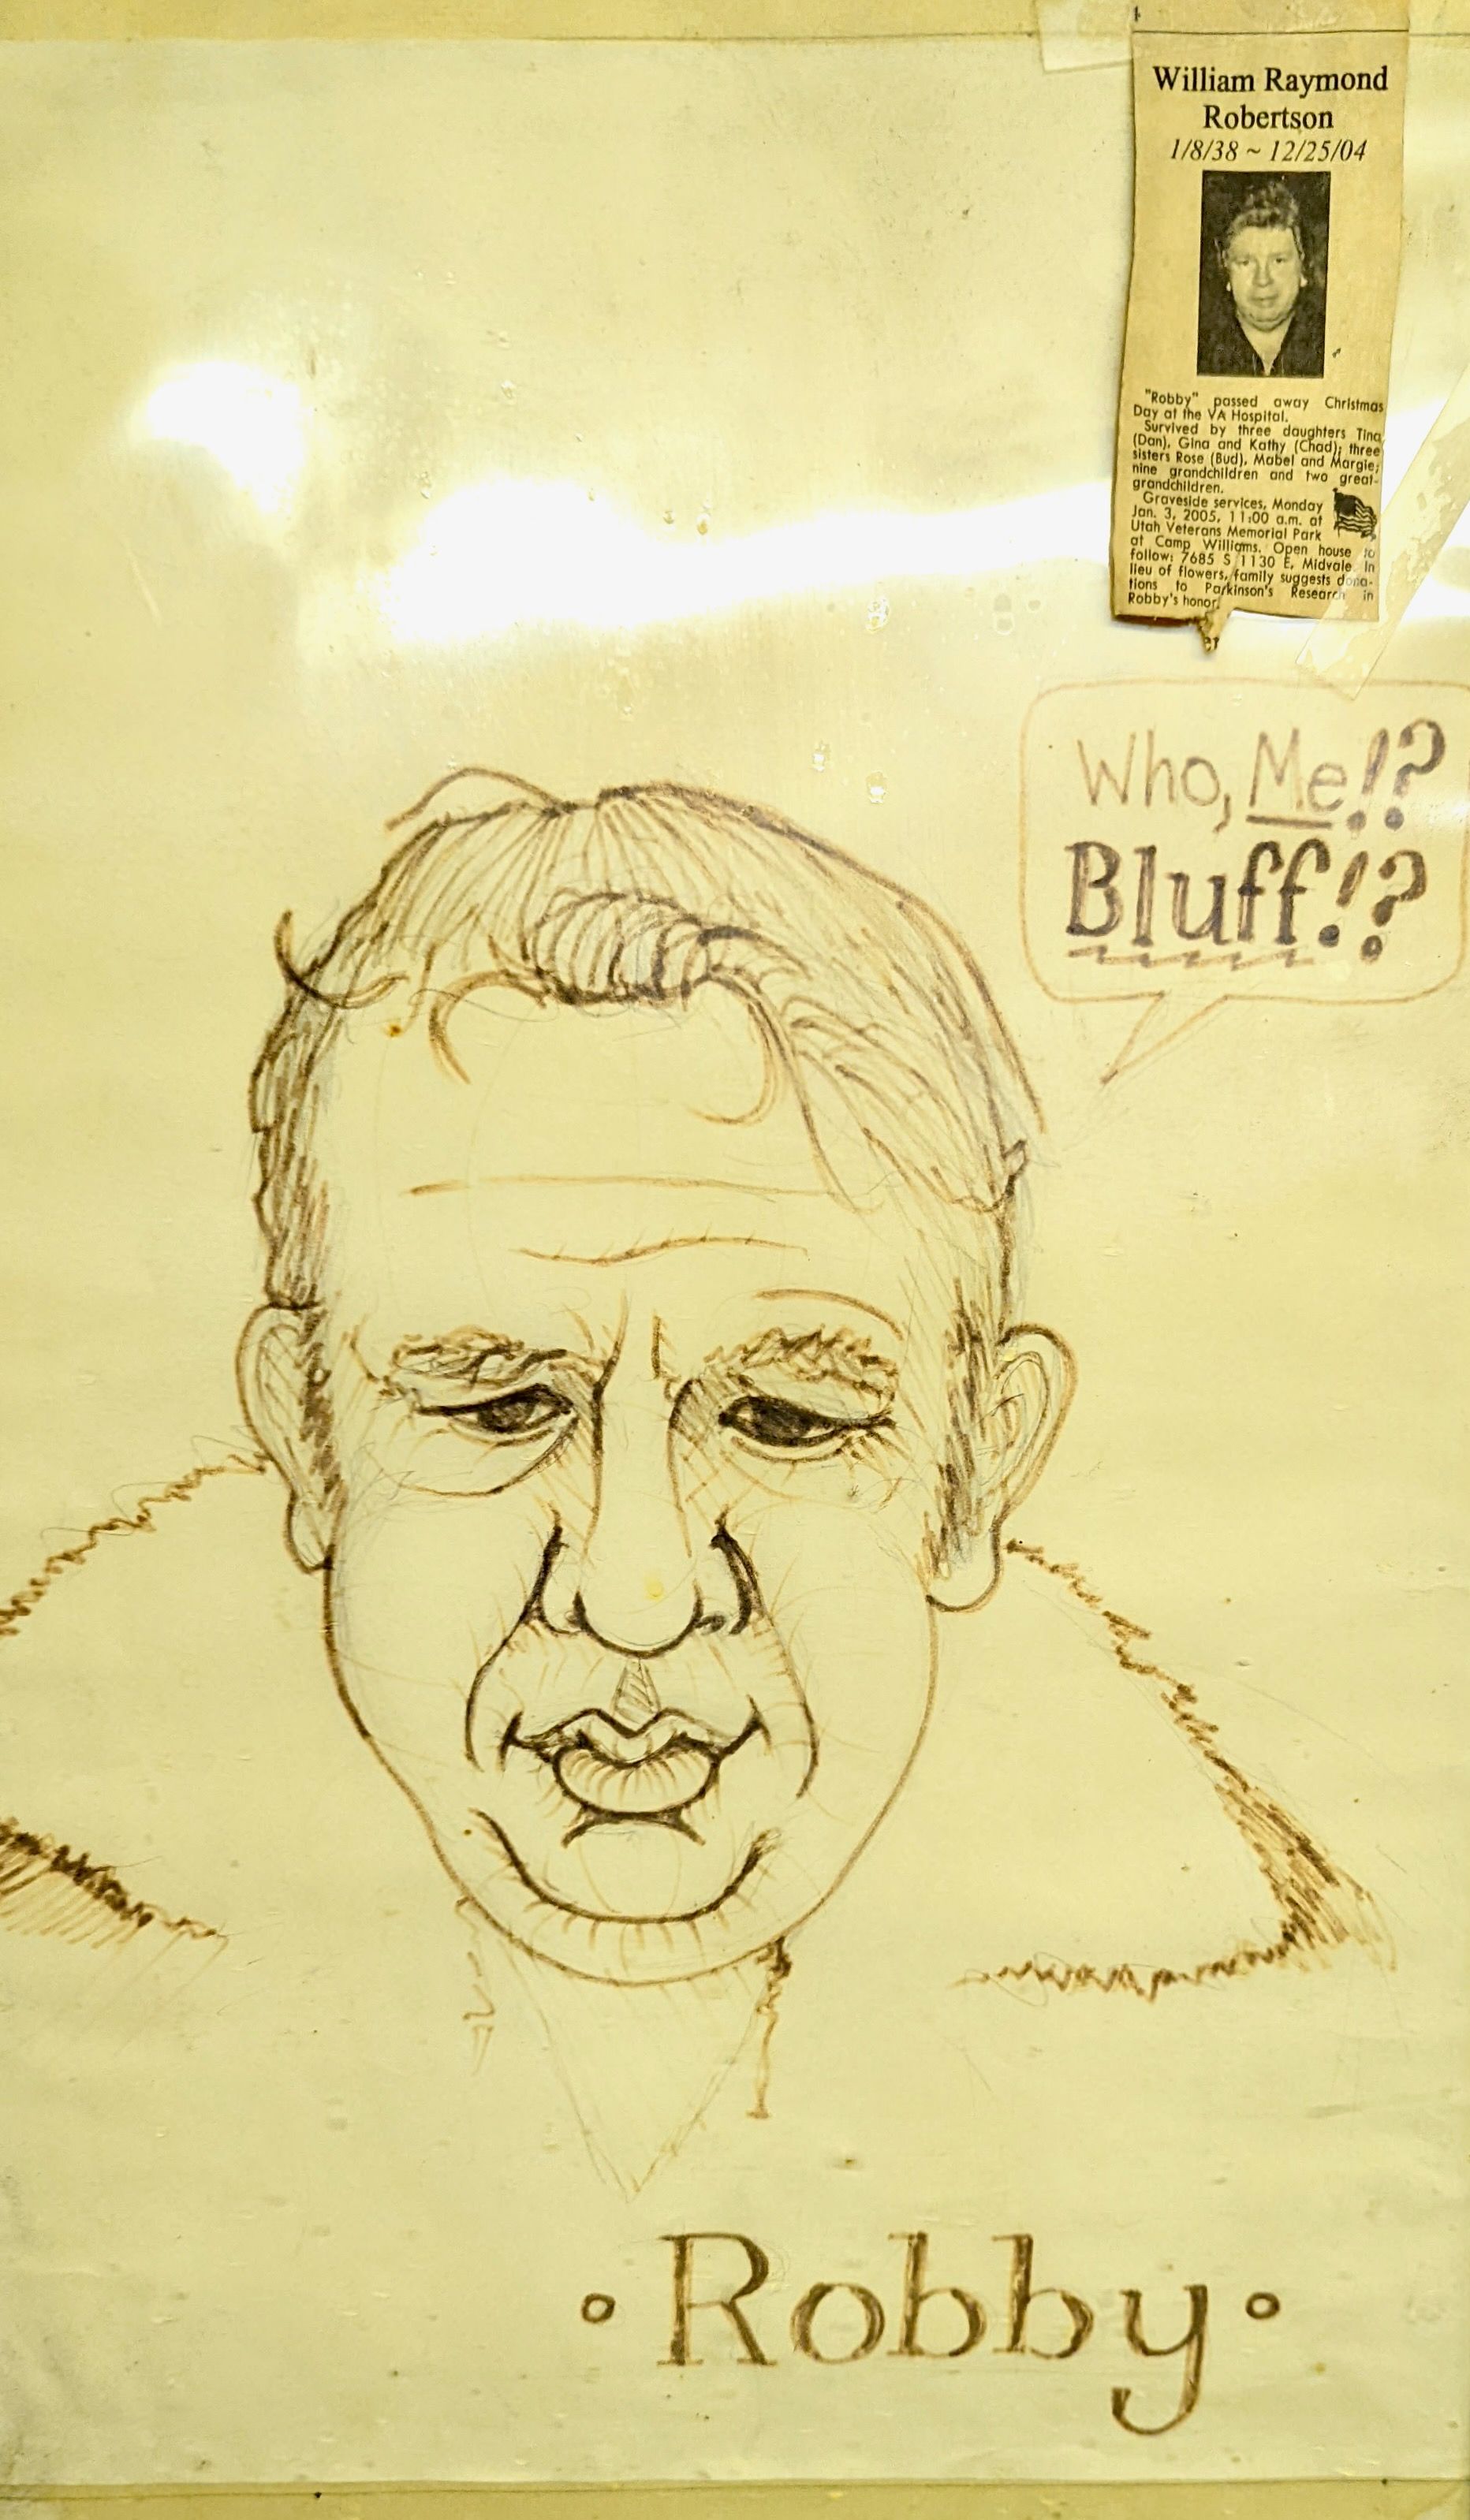 A drawn portrait shows a man's face, labeled "Robby" with the quote "Who, Me!? Bluff!!?" and his obituary taped to the corner. 